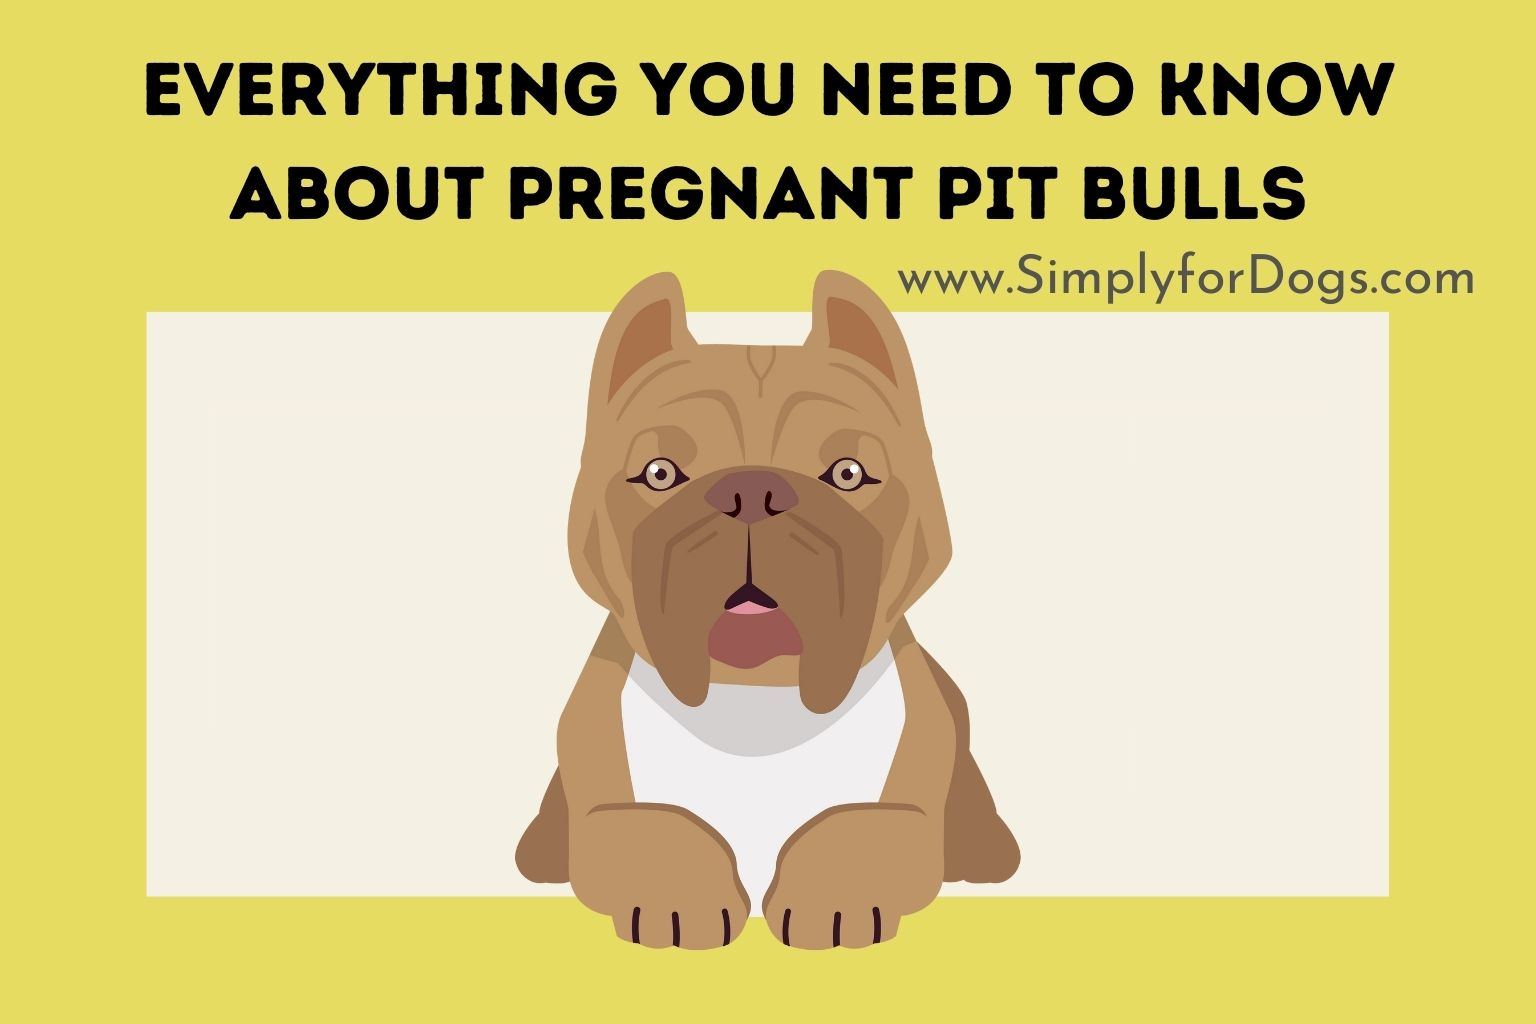 Everything You Need to Know About Pregnant Pit Bulls